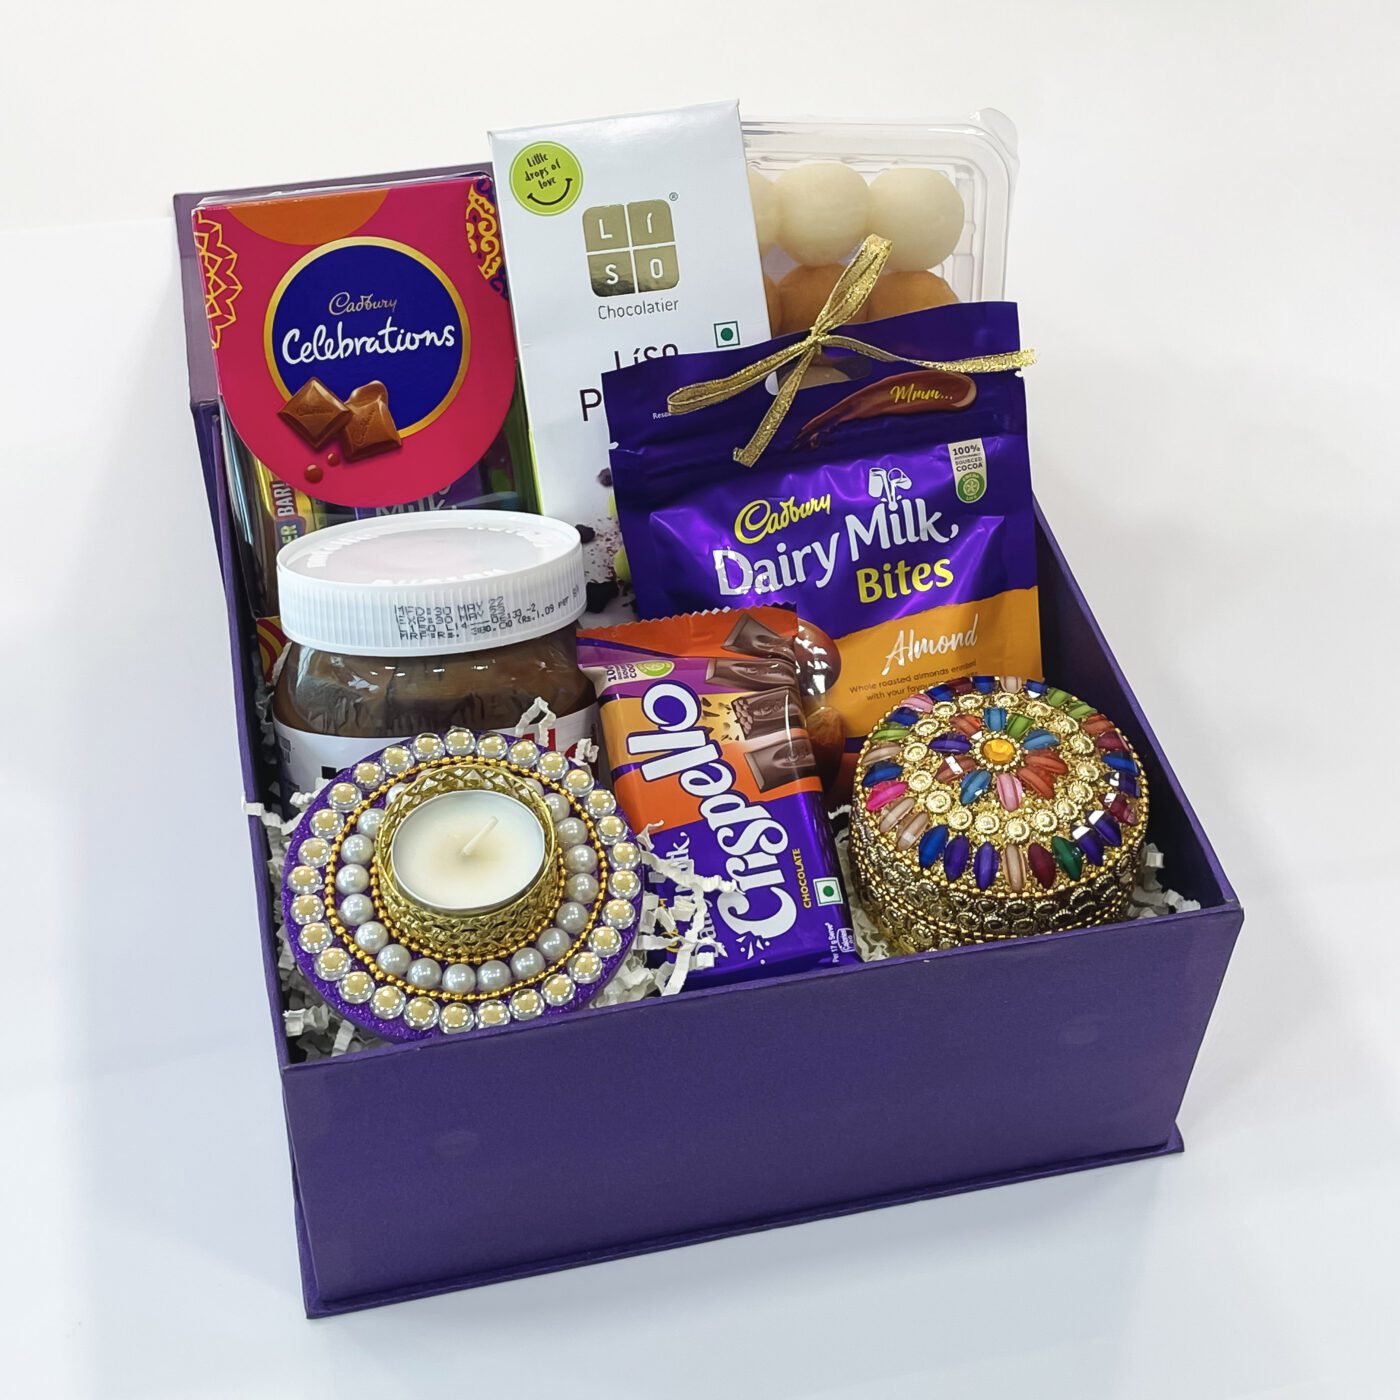 Savoury Treats And Sweets Fusion Gourmet Hamper: Gift/Send Gourmet Gifts  Online JVS1263662 |IGP.com